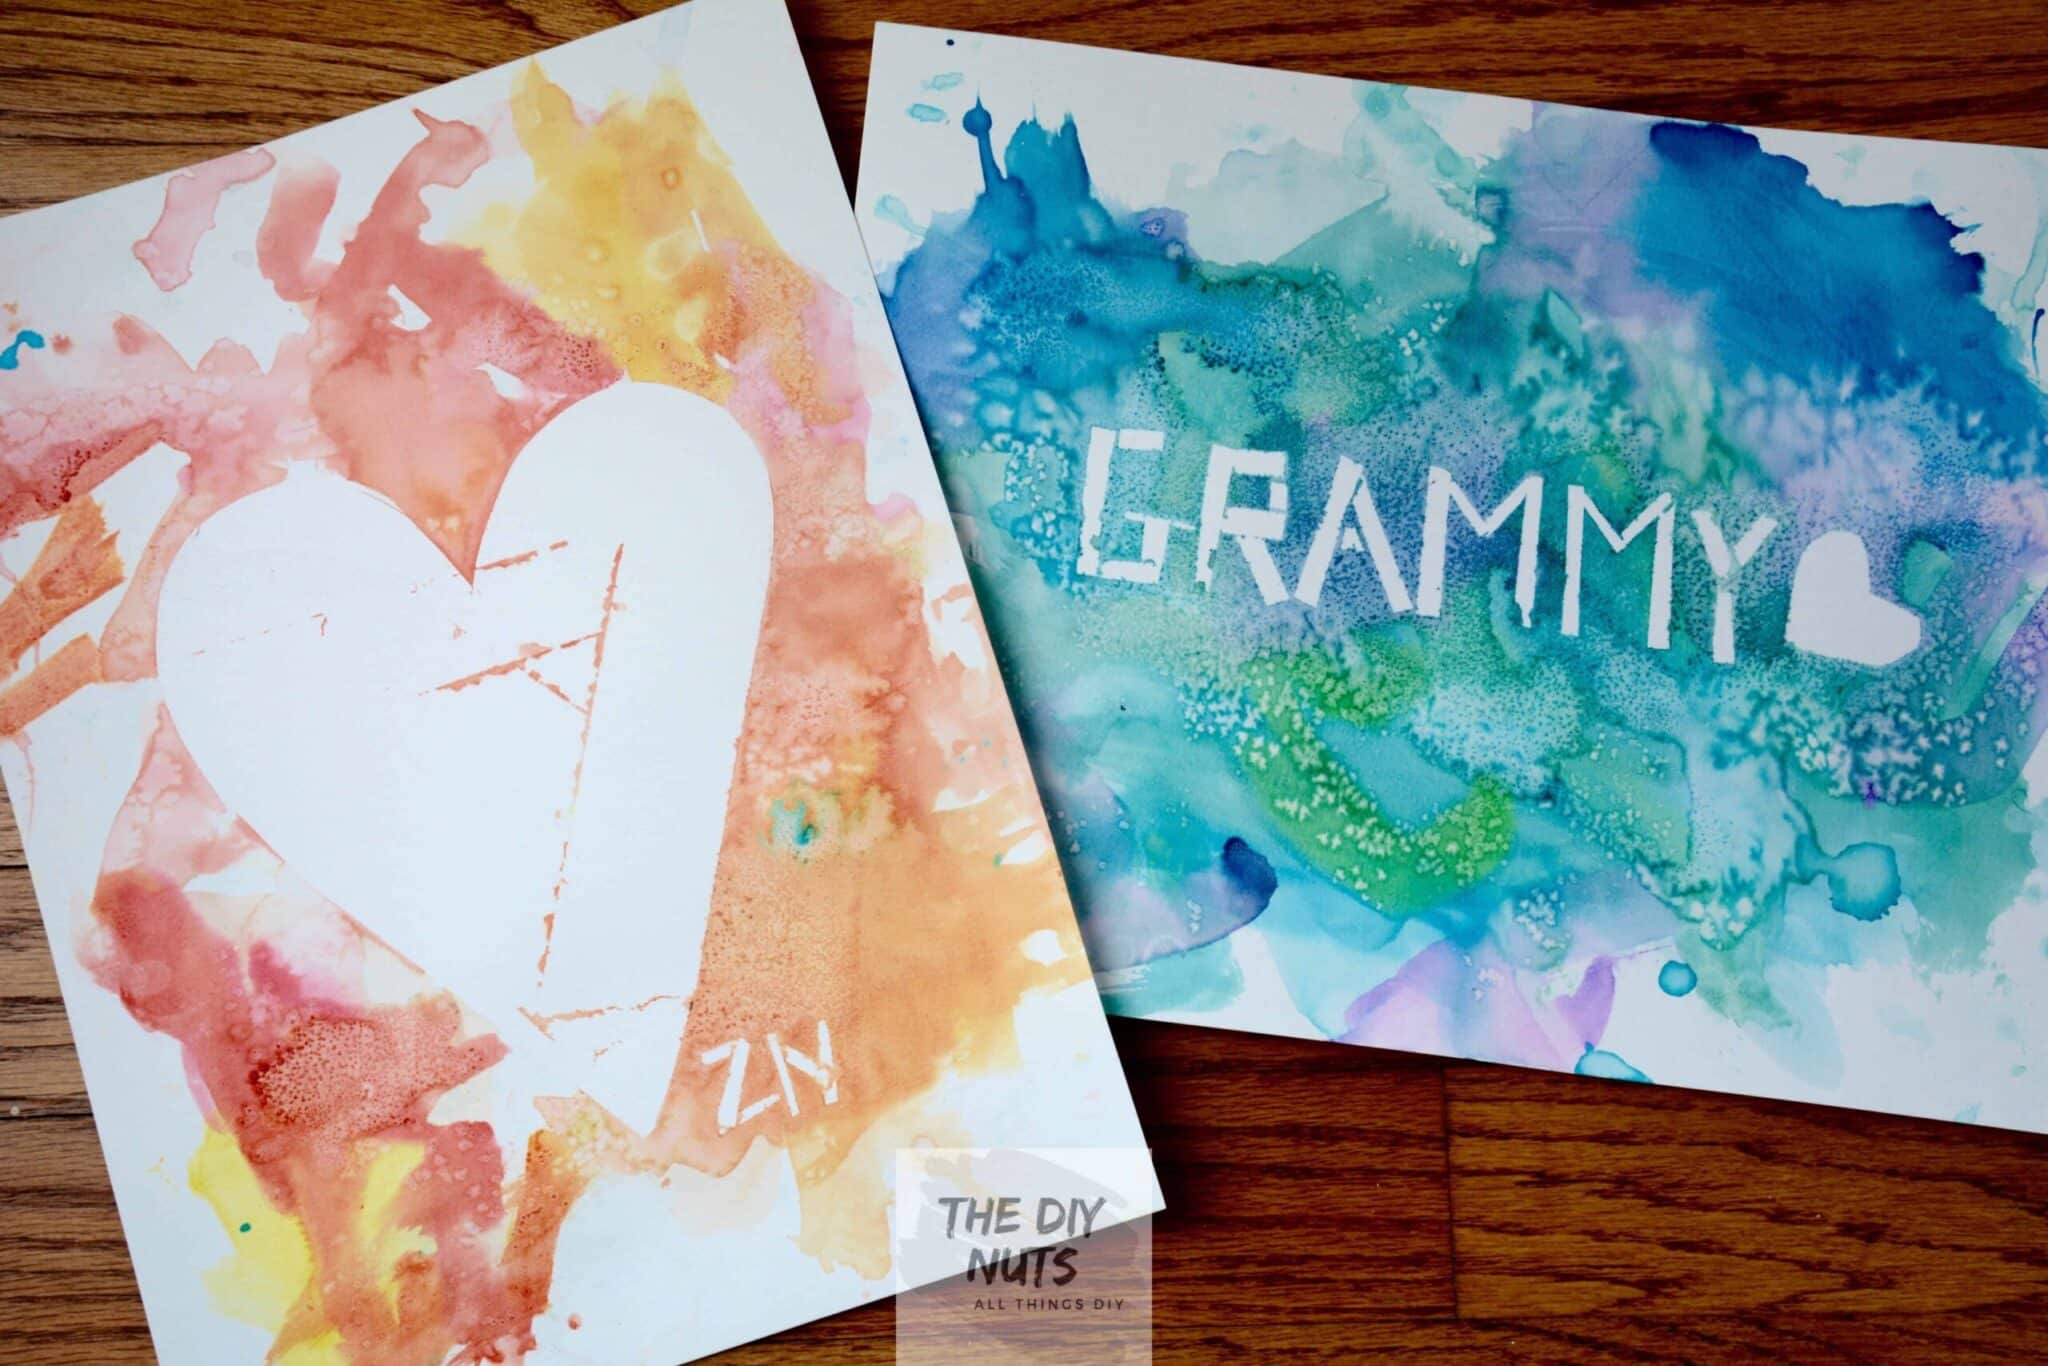 Heart Watercolor painting and Grammy watercolor art projects made by toddlers